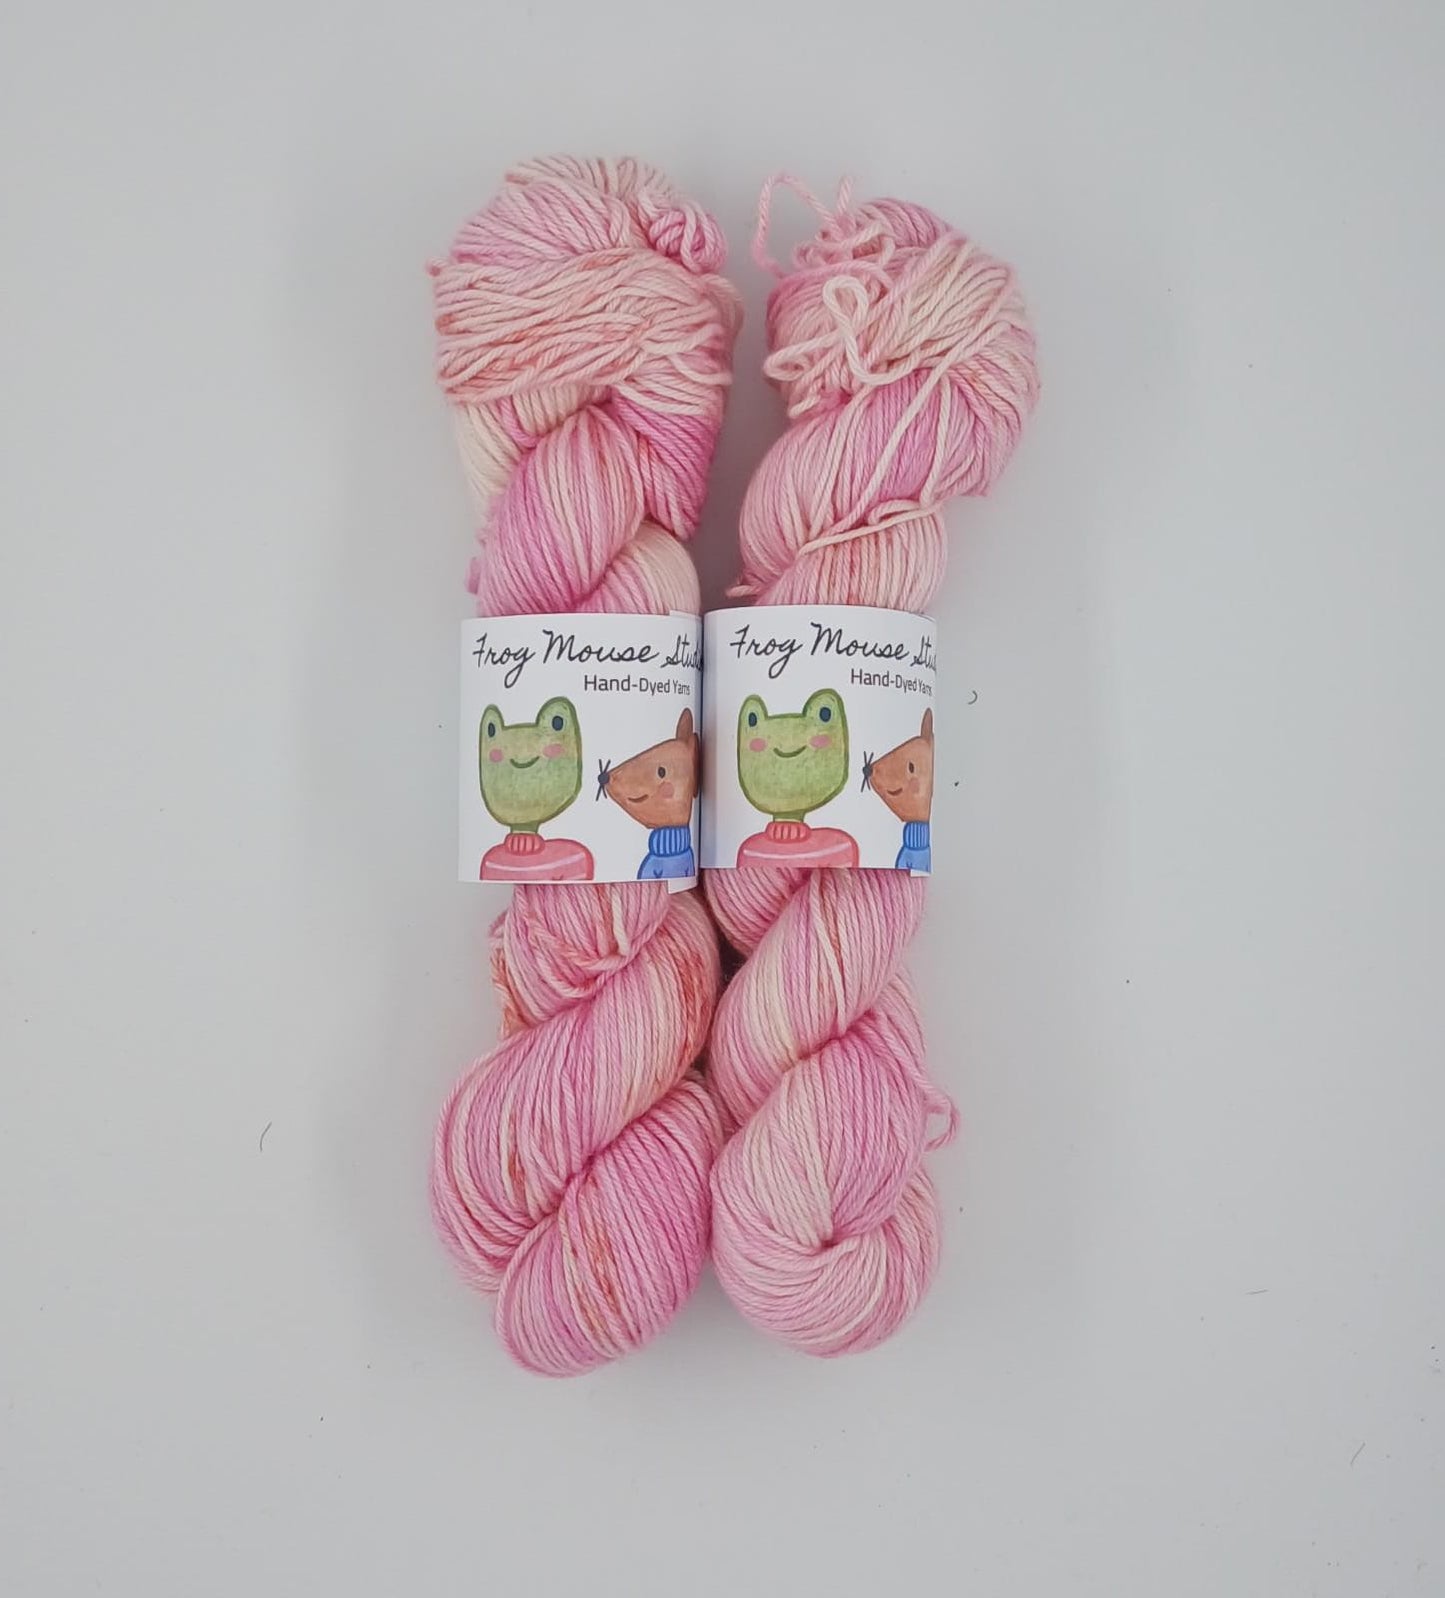 “Piglet” in Frog Mouse Cotton Merino